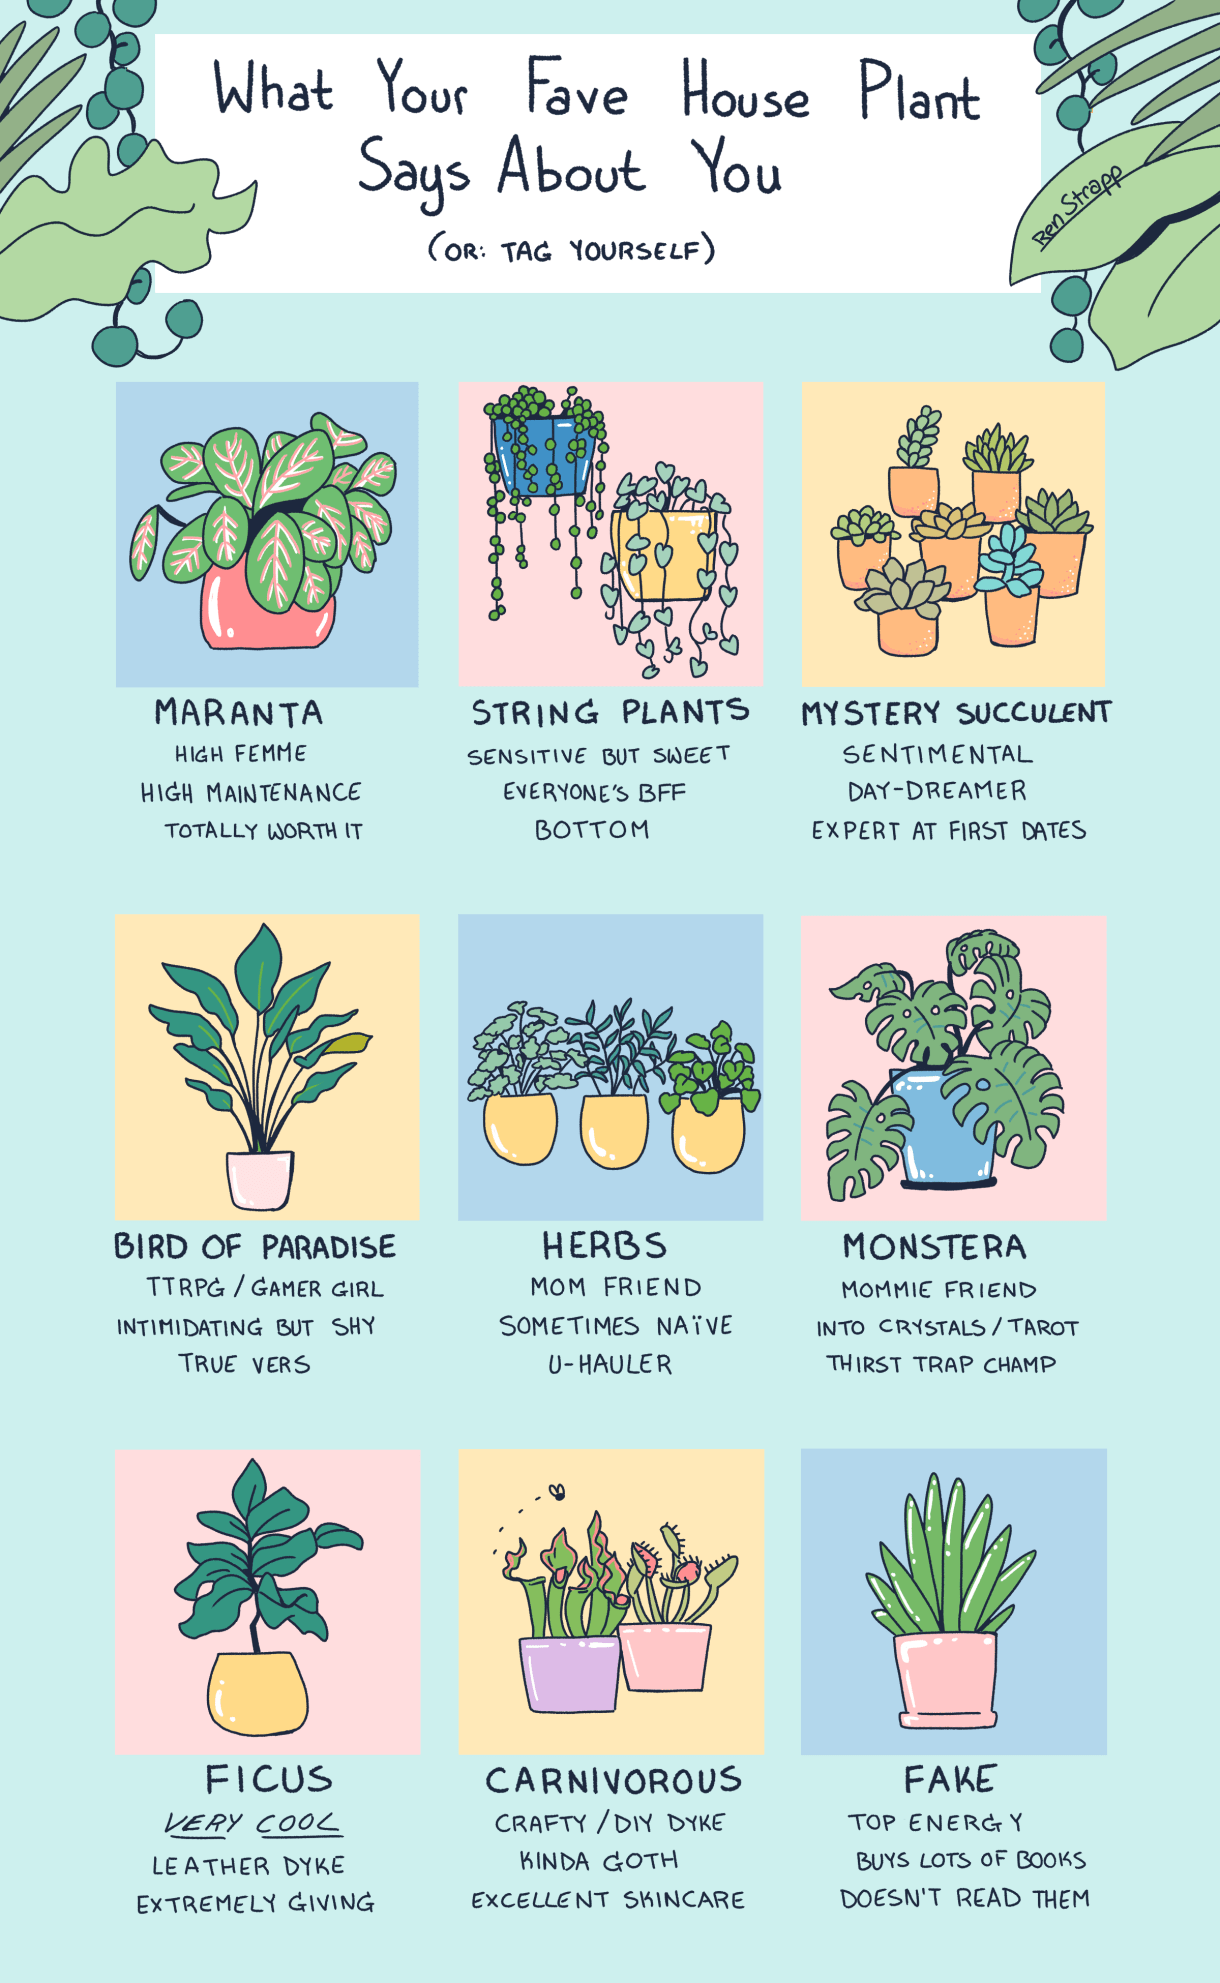 A hand drawn image of nine plants in pastel colors. They are attached with the following descriptions: Maranata — High femme, high maintenance, totally worth it. String Plants — sensitive but sweet, everyone’s BFF bottom, Mystery Succulent — sentimental, day-dreamer, expert at first dates. Bird of Paradise — TTRPG, Gamer Girl, intimidating but shy, true vers. Herbs — Mom friend, sometimes naive U-Hauler. Monstera — Mommi Friend, into crystals/tarot, thirst trap Champ. Ficus — very cool leather dyke, extremely giving. Carnivorous — crafty/DIY dyke, kinda goth, excellent skincare. Fake — Top energy, buys lots of books, doesn’t read them.